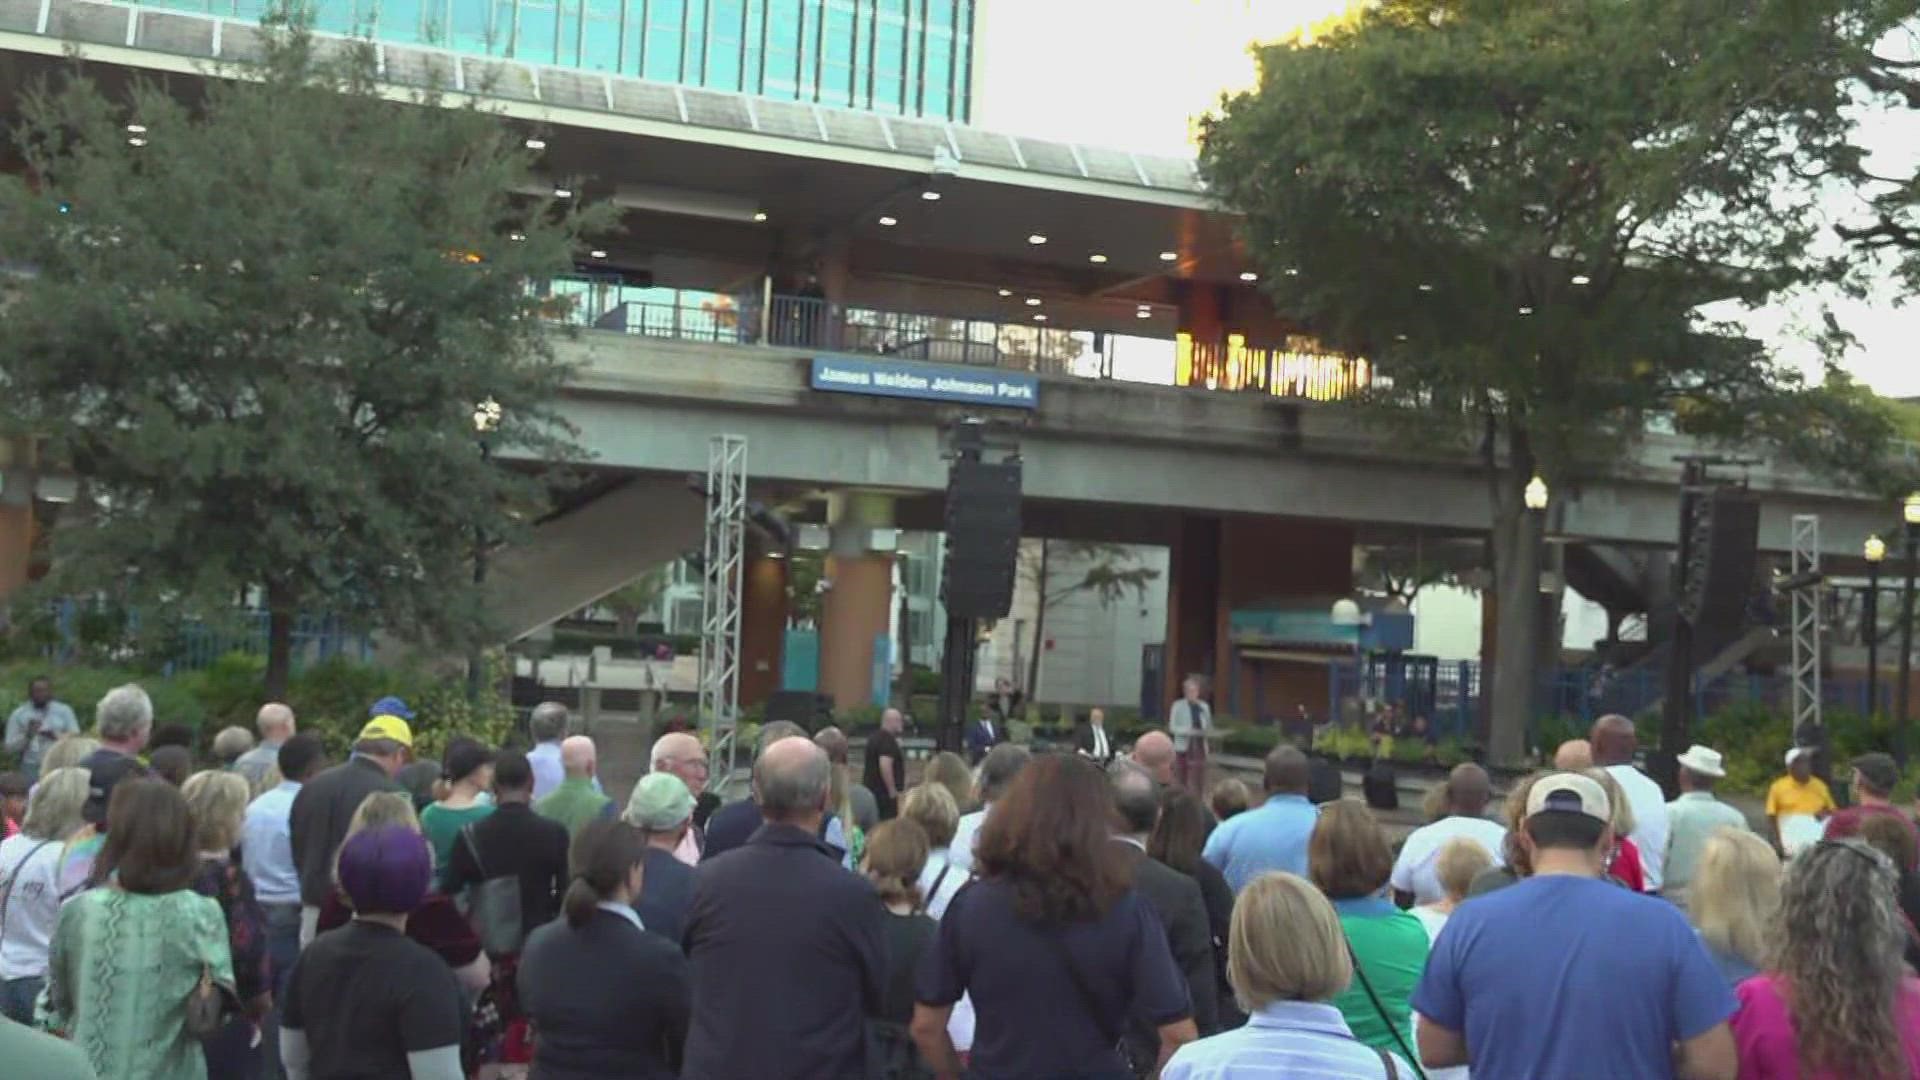 The group OneJax organized a rally and vigil to show support for the Jewish community in Northeast Florida.